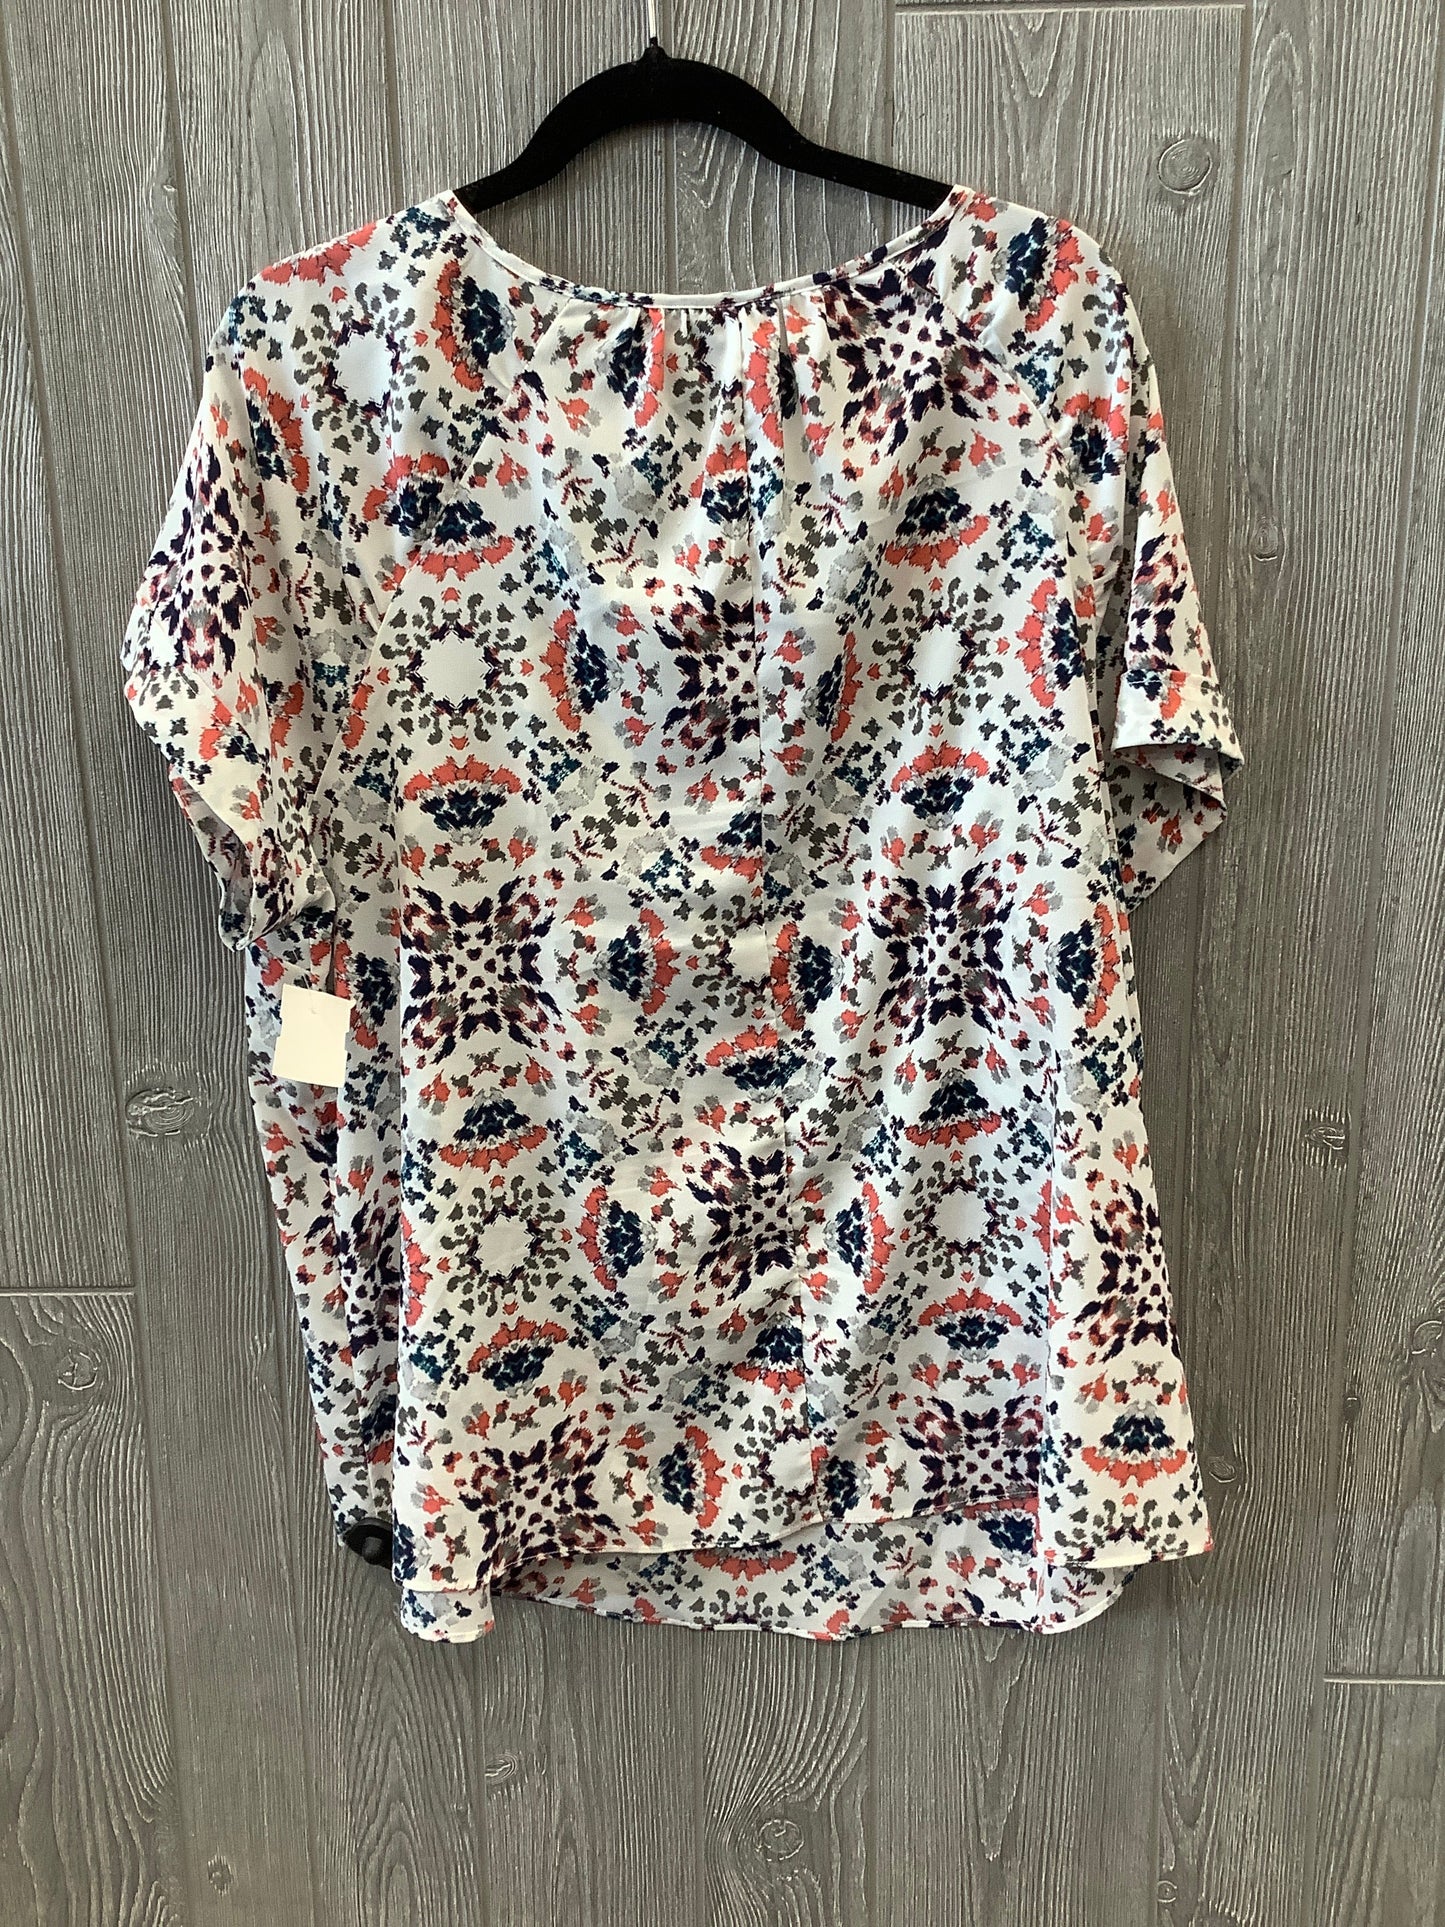 Multi-colored Top Short Sleeve Ana, Size 1x